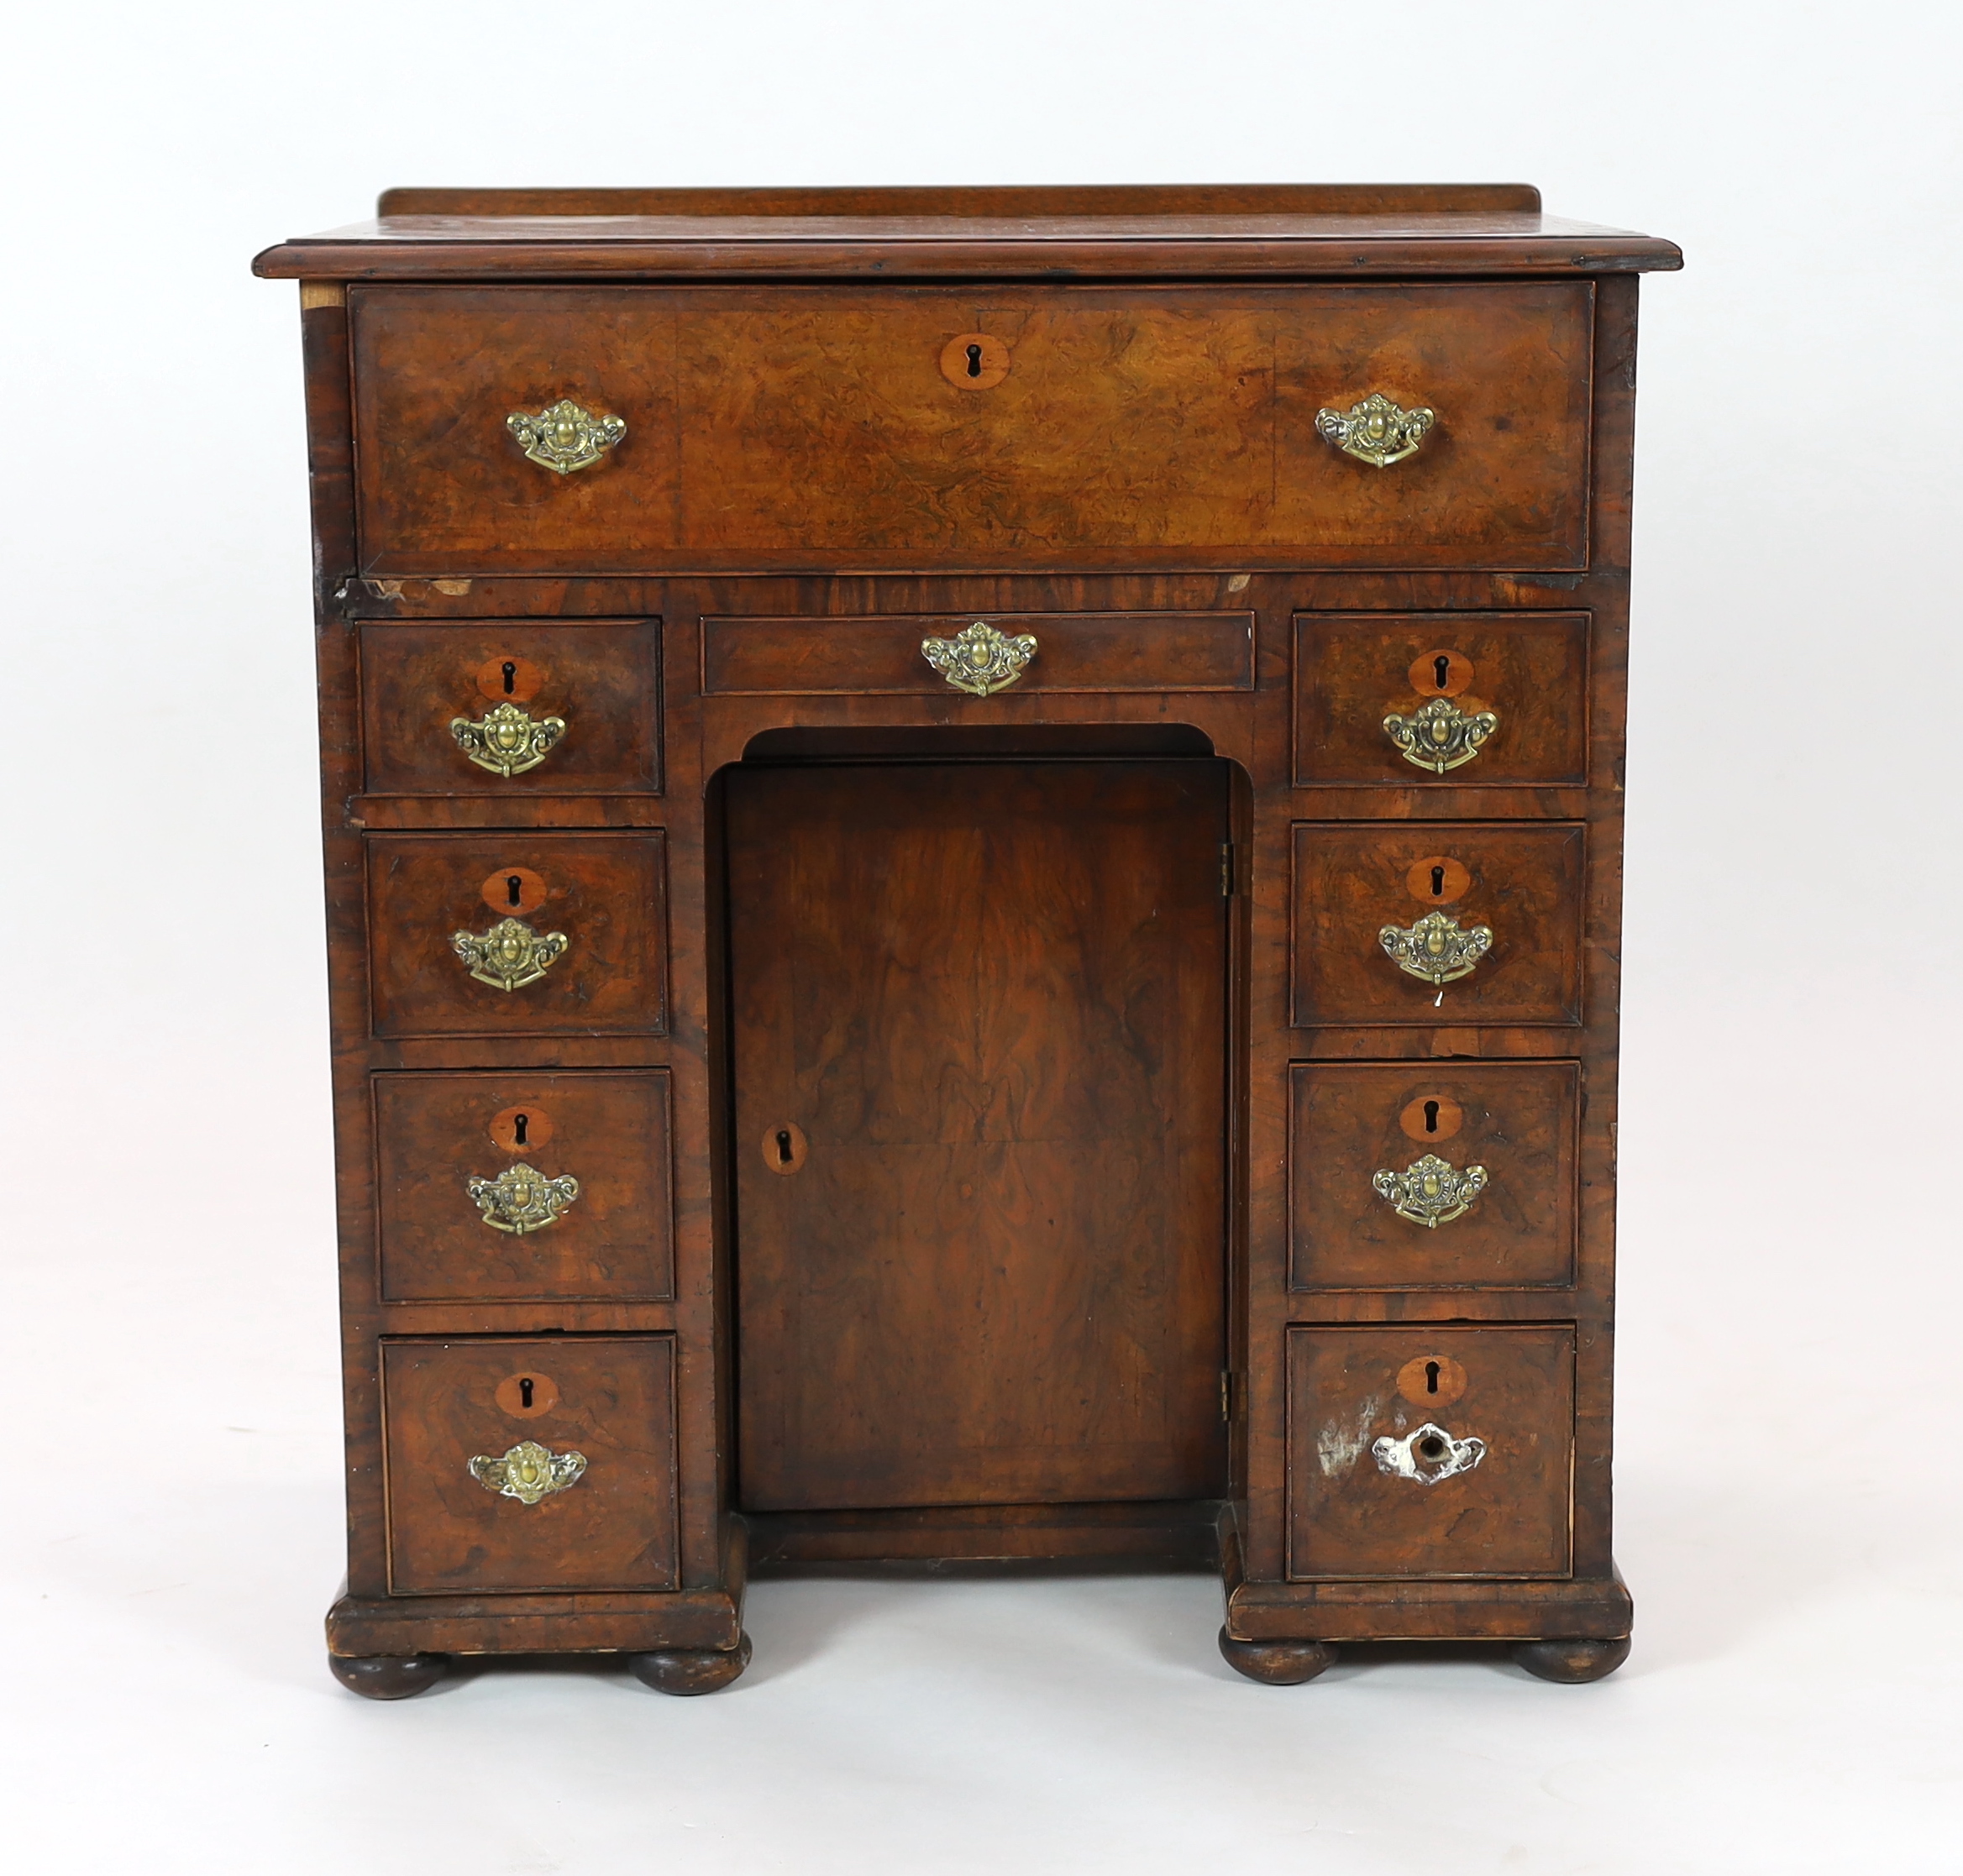 An early 18th century walnut kneehole secretaire desk, with quarter veneered top and fall front drawer opening to reveal pigeon holes and drawers, over eight further drawers surrounding a central recessed cupboard, on pa